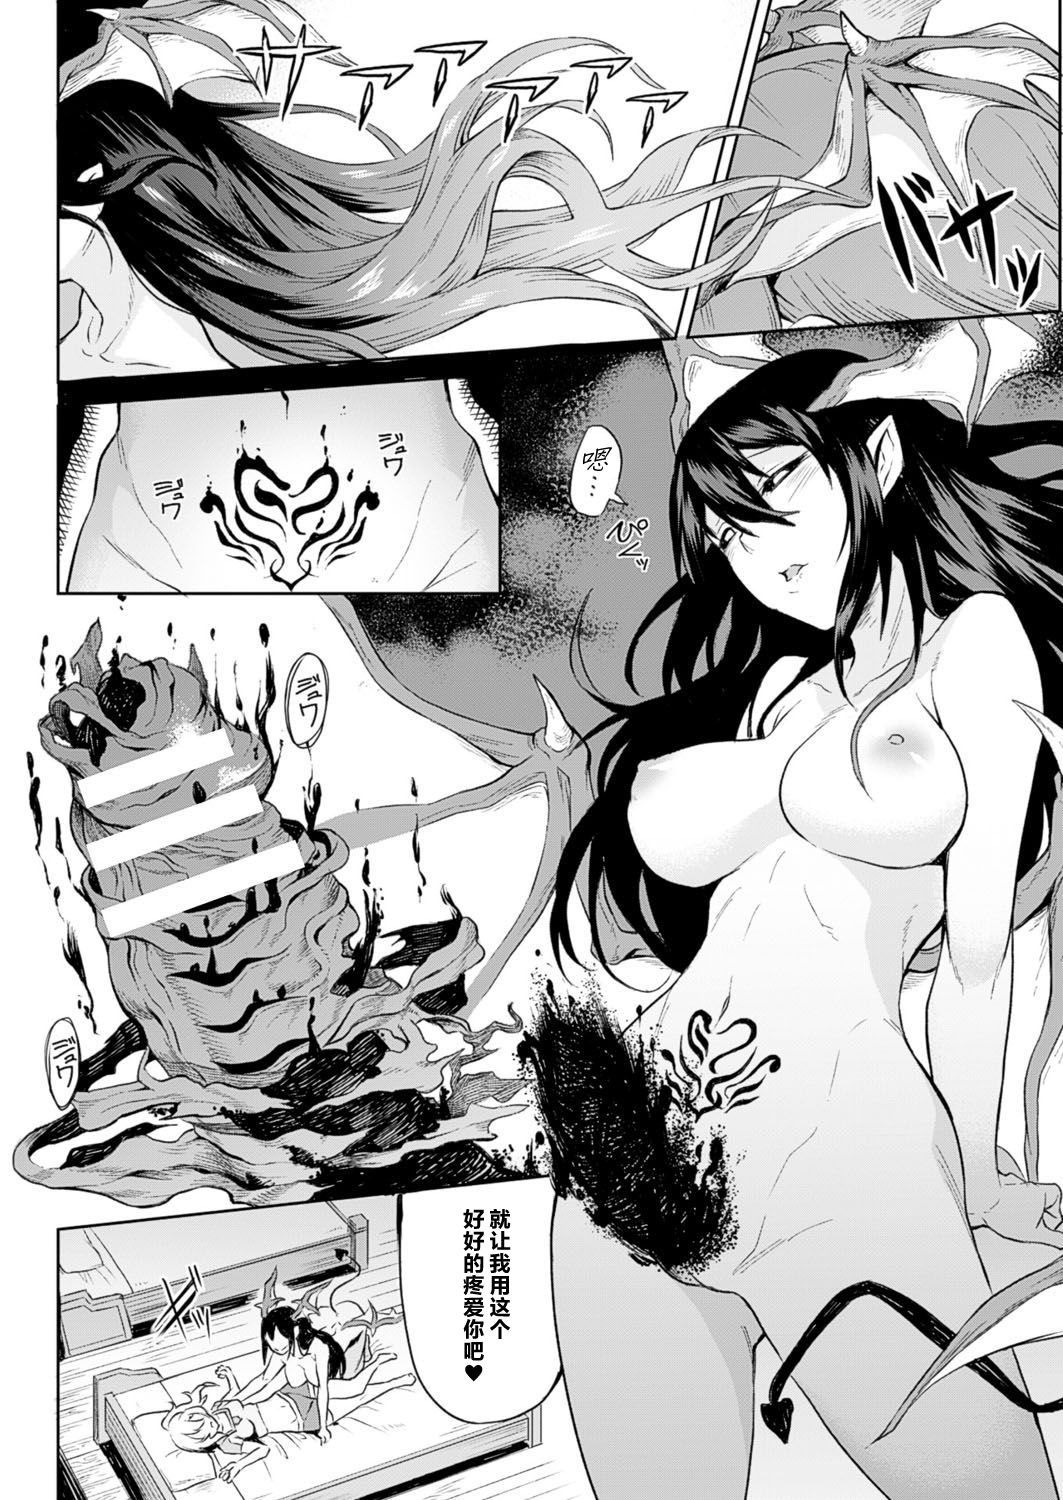 [Take] The Book of the Licentious Thief (COMIC Unreal 2016-10 Vol. 63) [Chinese] [这很恶堕 x Lolipoi汉化组] [タケ] 淫泥の書 (コミックアンリアル 2016年10月号 Vol.63) [中国翻訳]